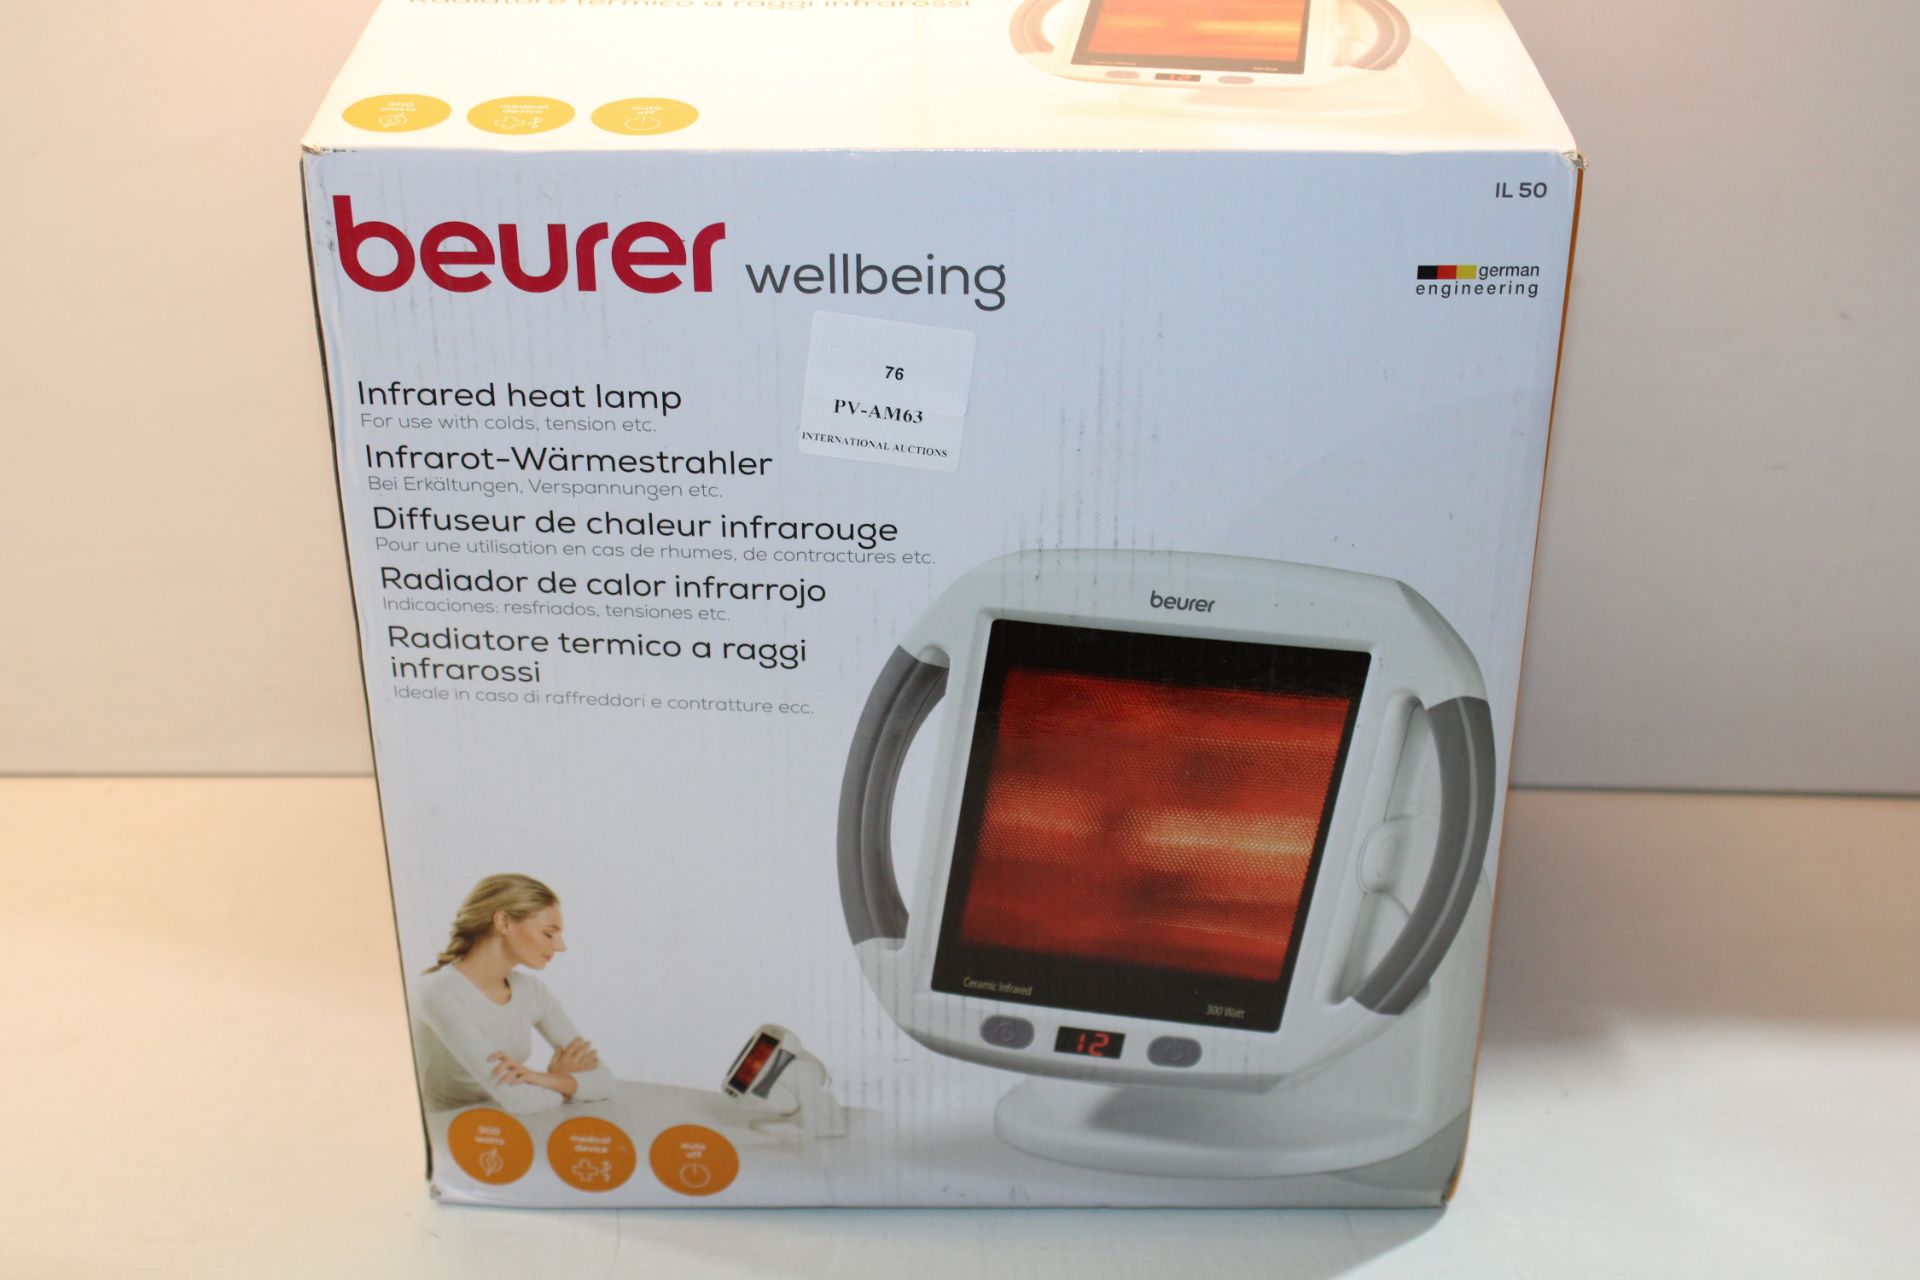 BOXED BEURER WELLBEING INFRARED HEAT LAMP MODEL: IL50 RRP £75.39Condition ReportAppraisal